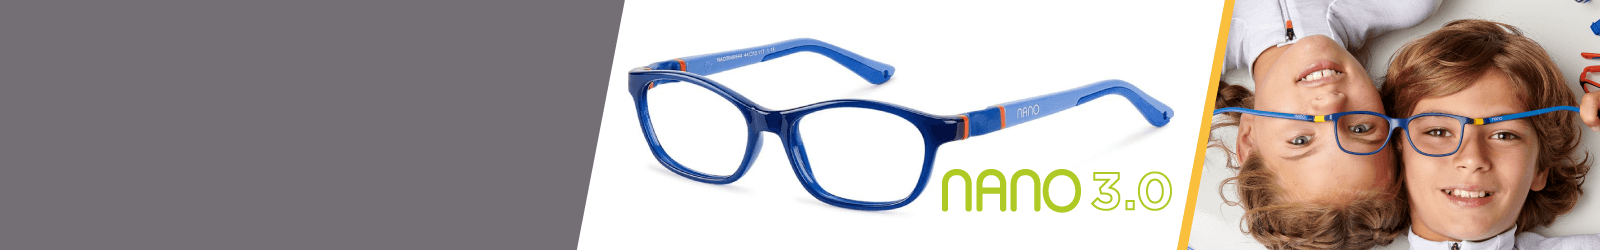 Nano 3.0 Indestructible Eyewear for Kids from 11 to 13-year-old for Girls